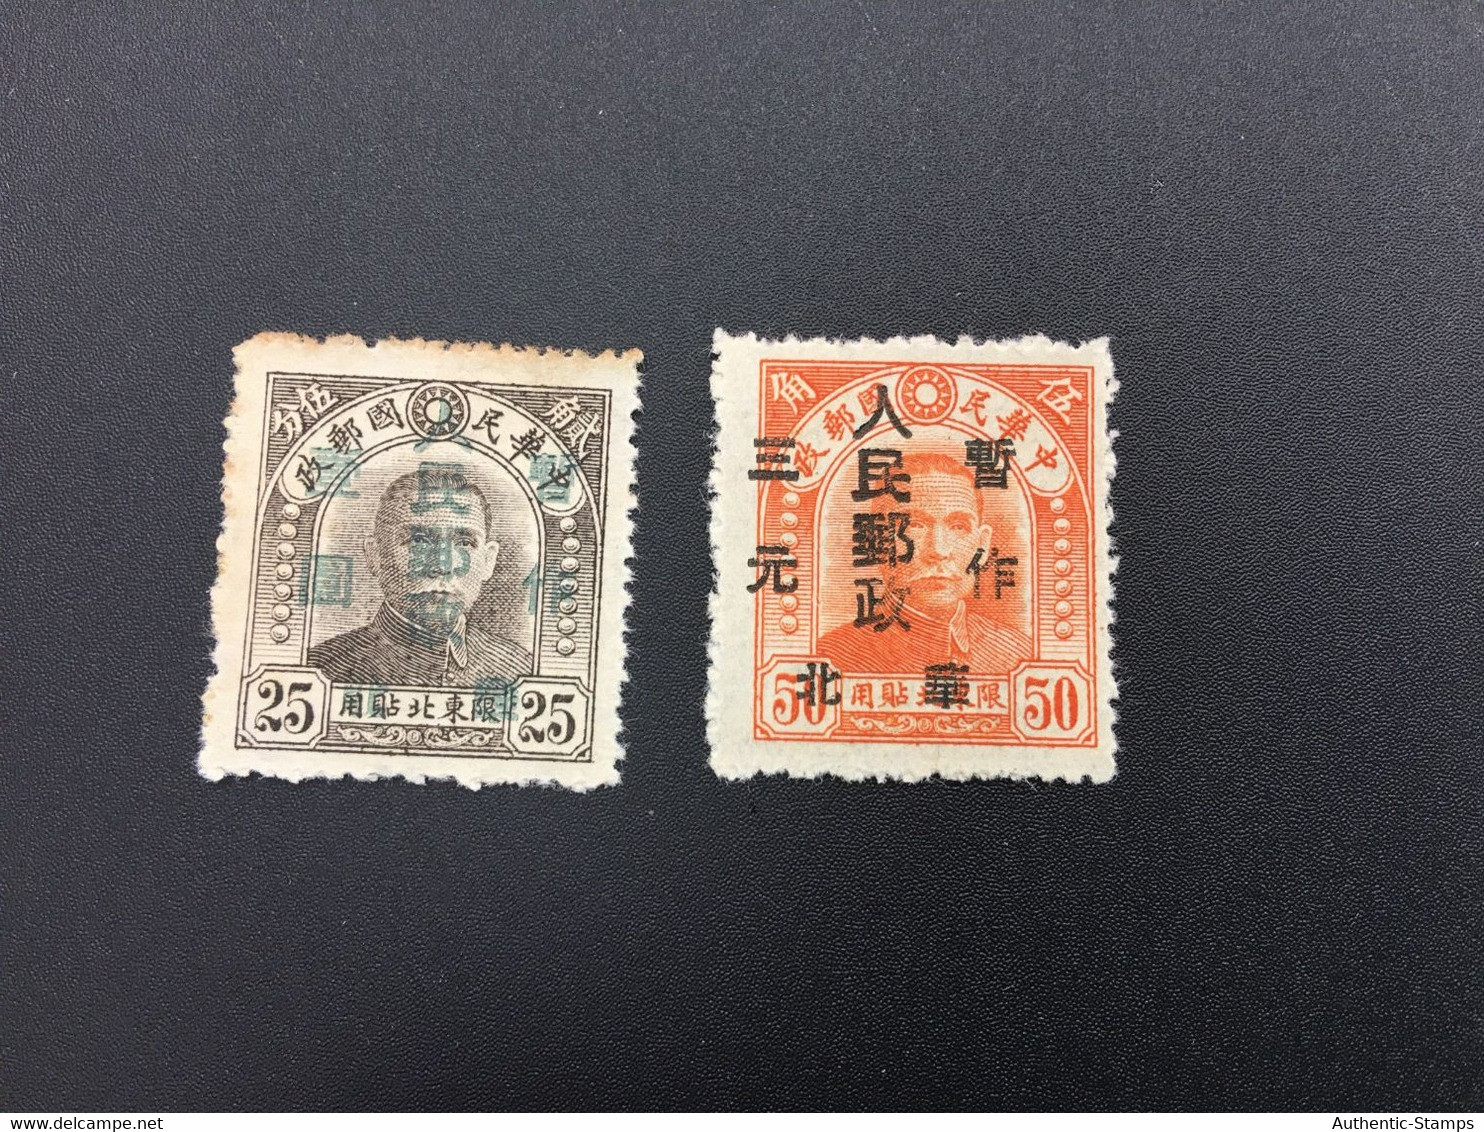 CHINA STAMP, SET, LIBERATED AREA, UNUSED, TIMBRO, STEMPEL, CINA, CHINE, LIST 6327 - Northern China 1949-50